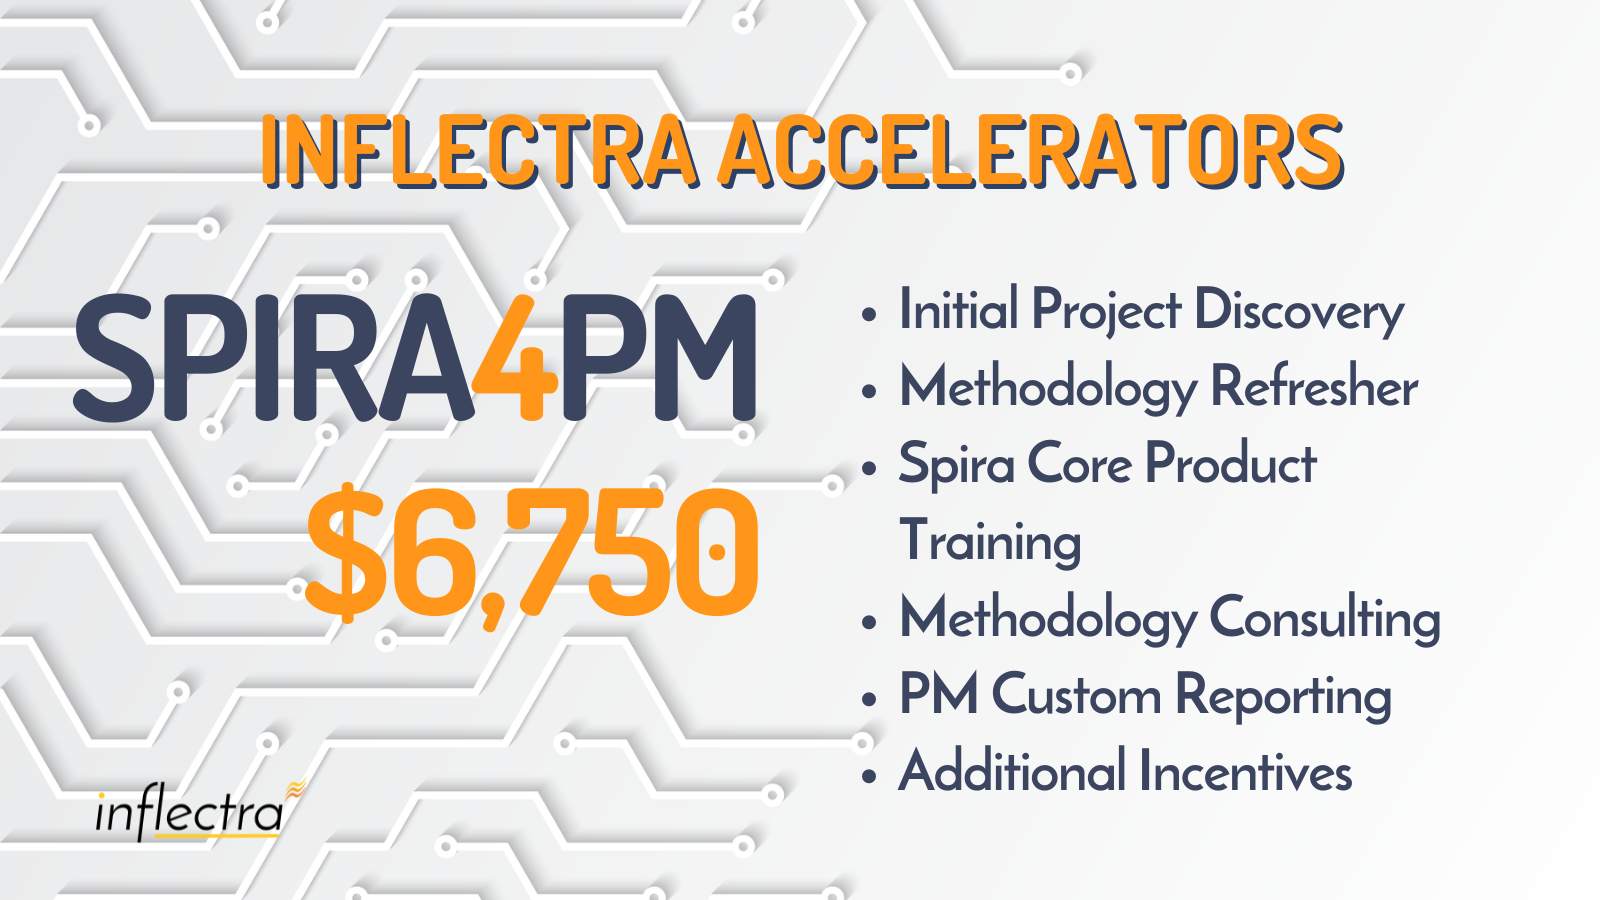 inflectra-accelerators-spira-and-rapise-quick-implementation-services-image